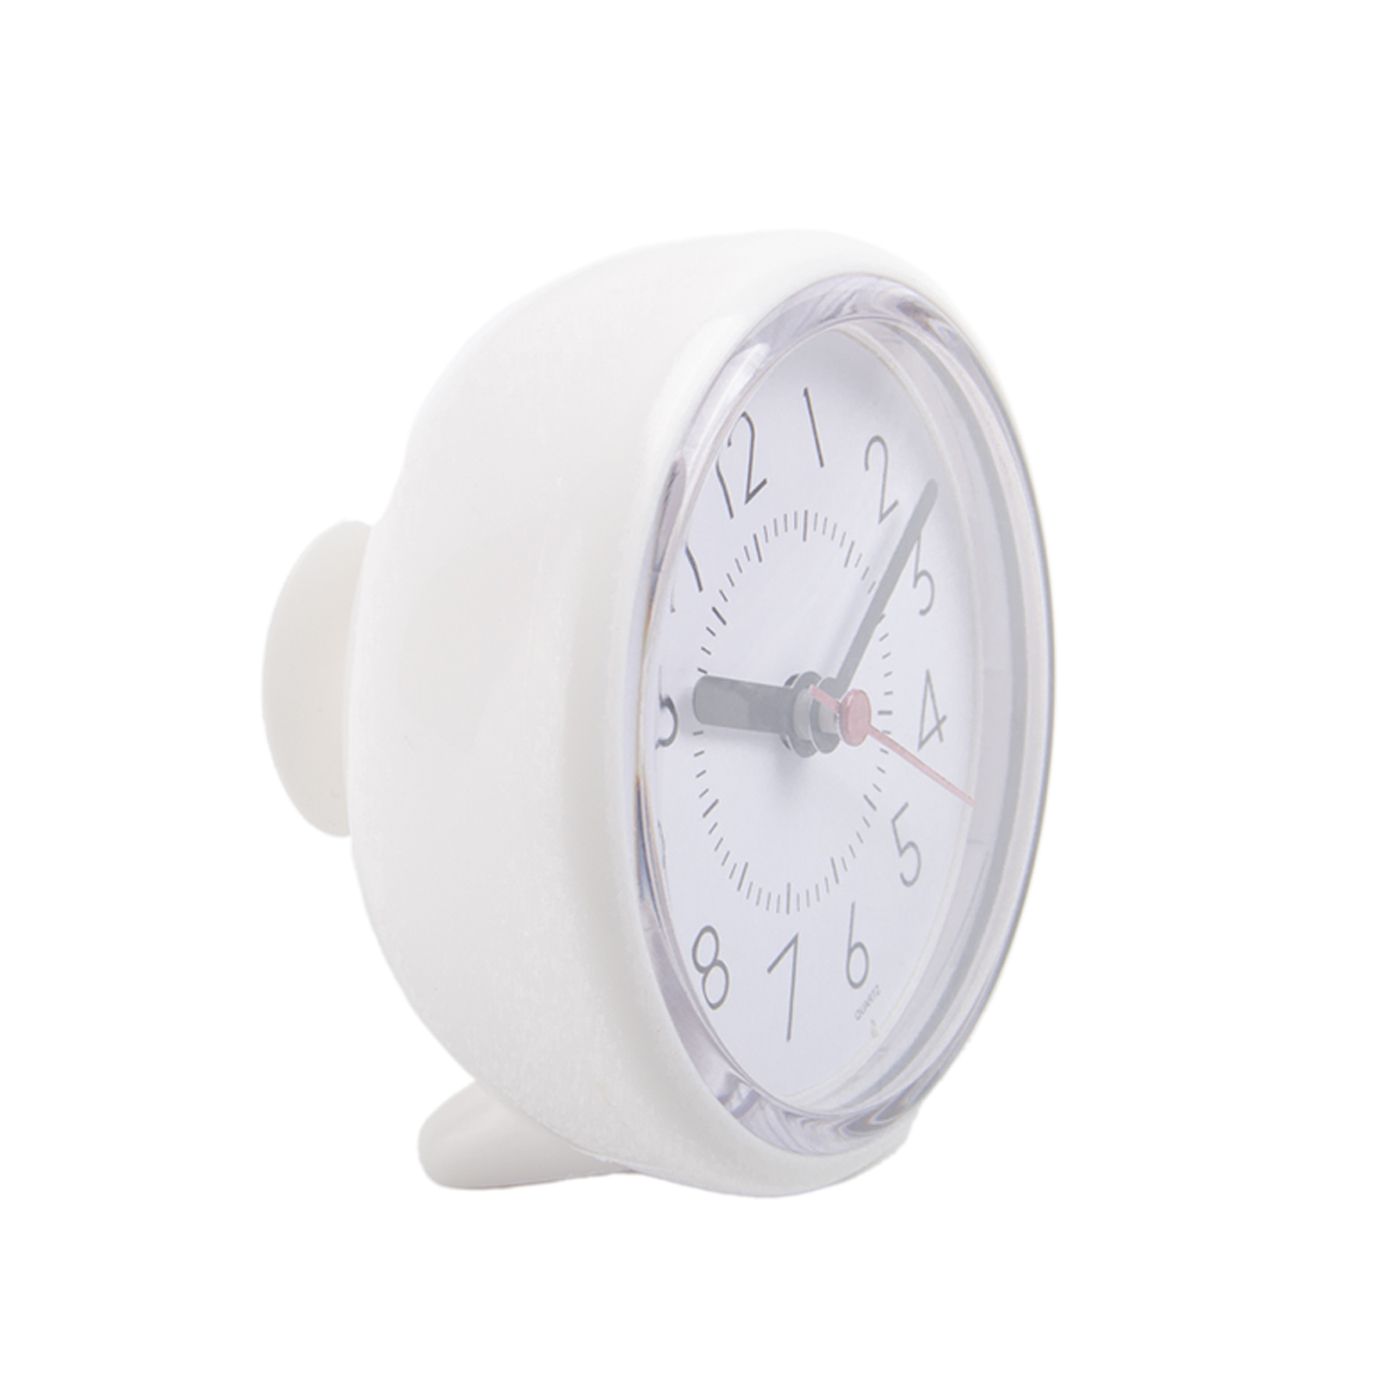 Waterproof Kitchen Clock With Suction Cup1